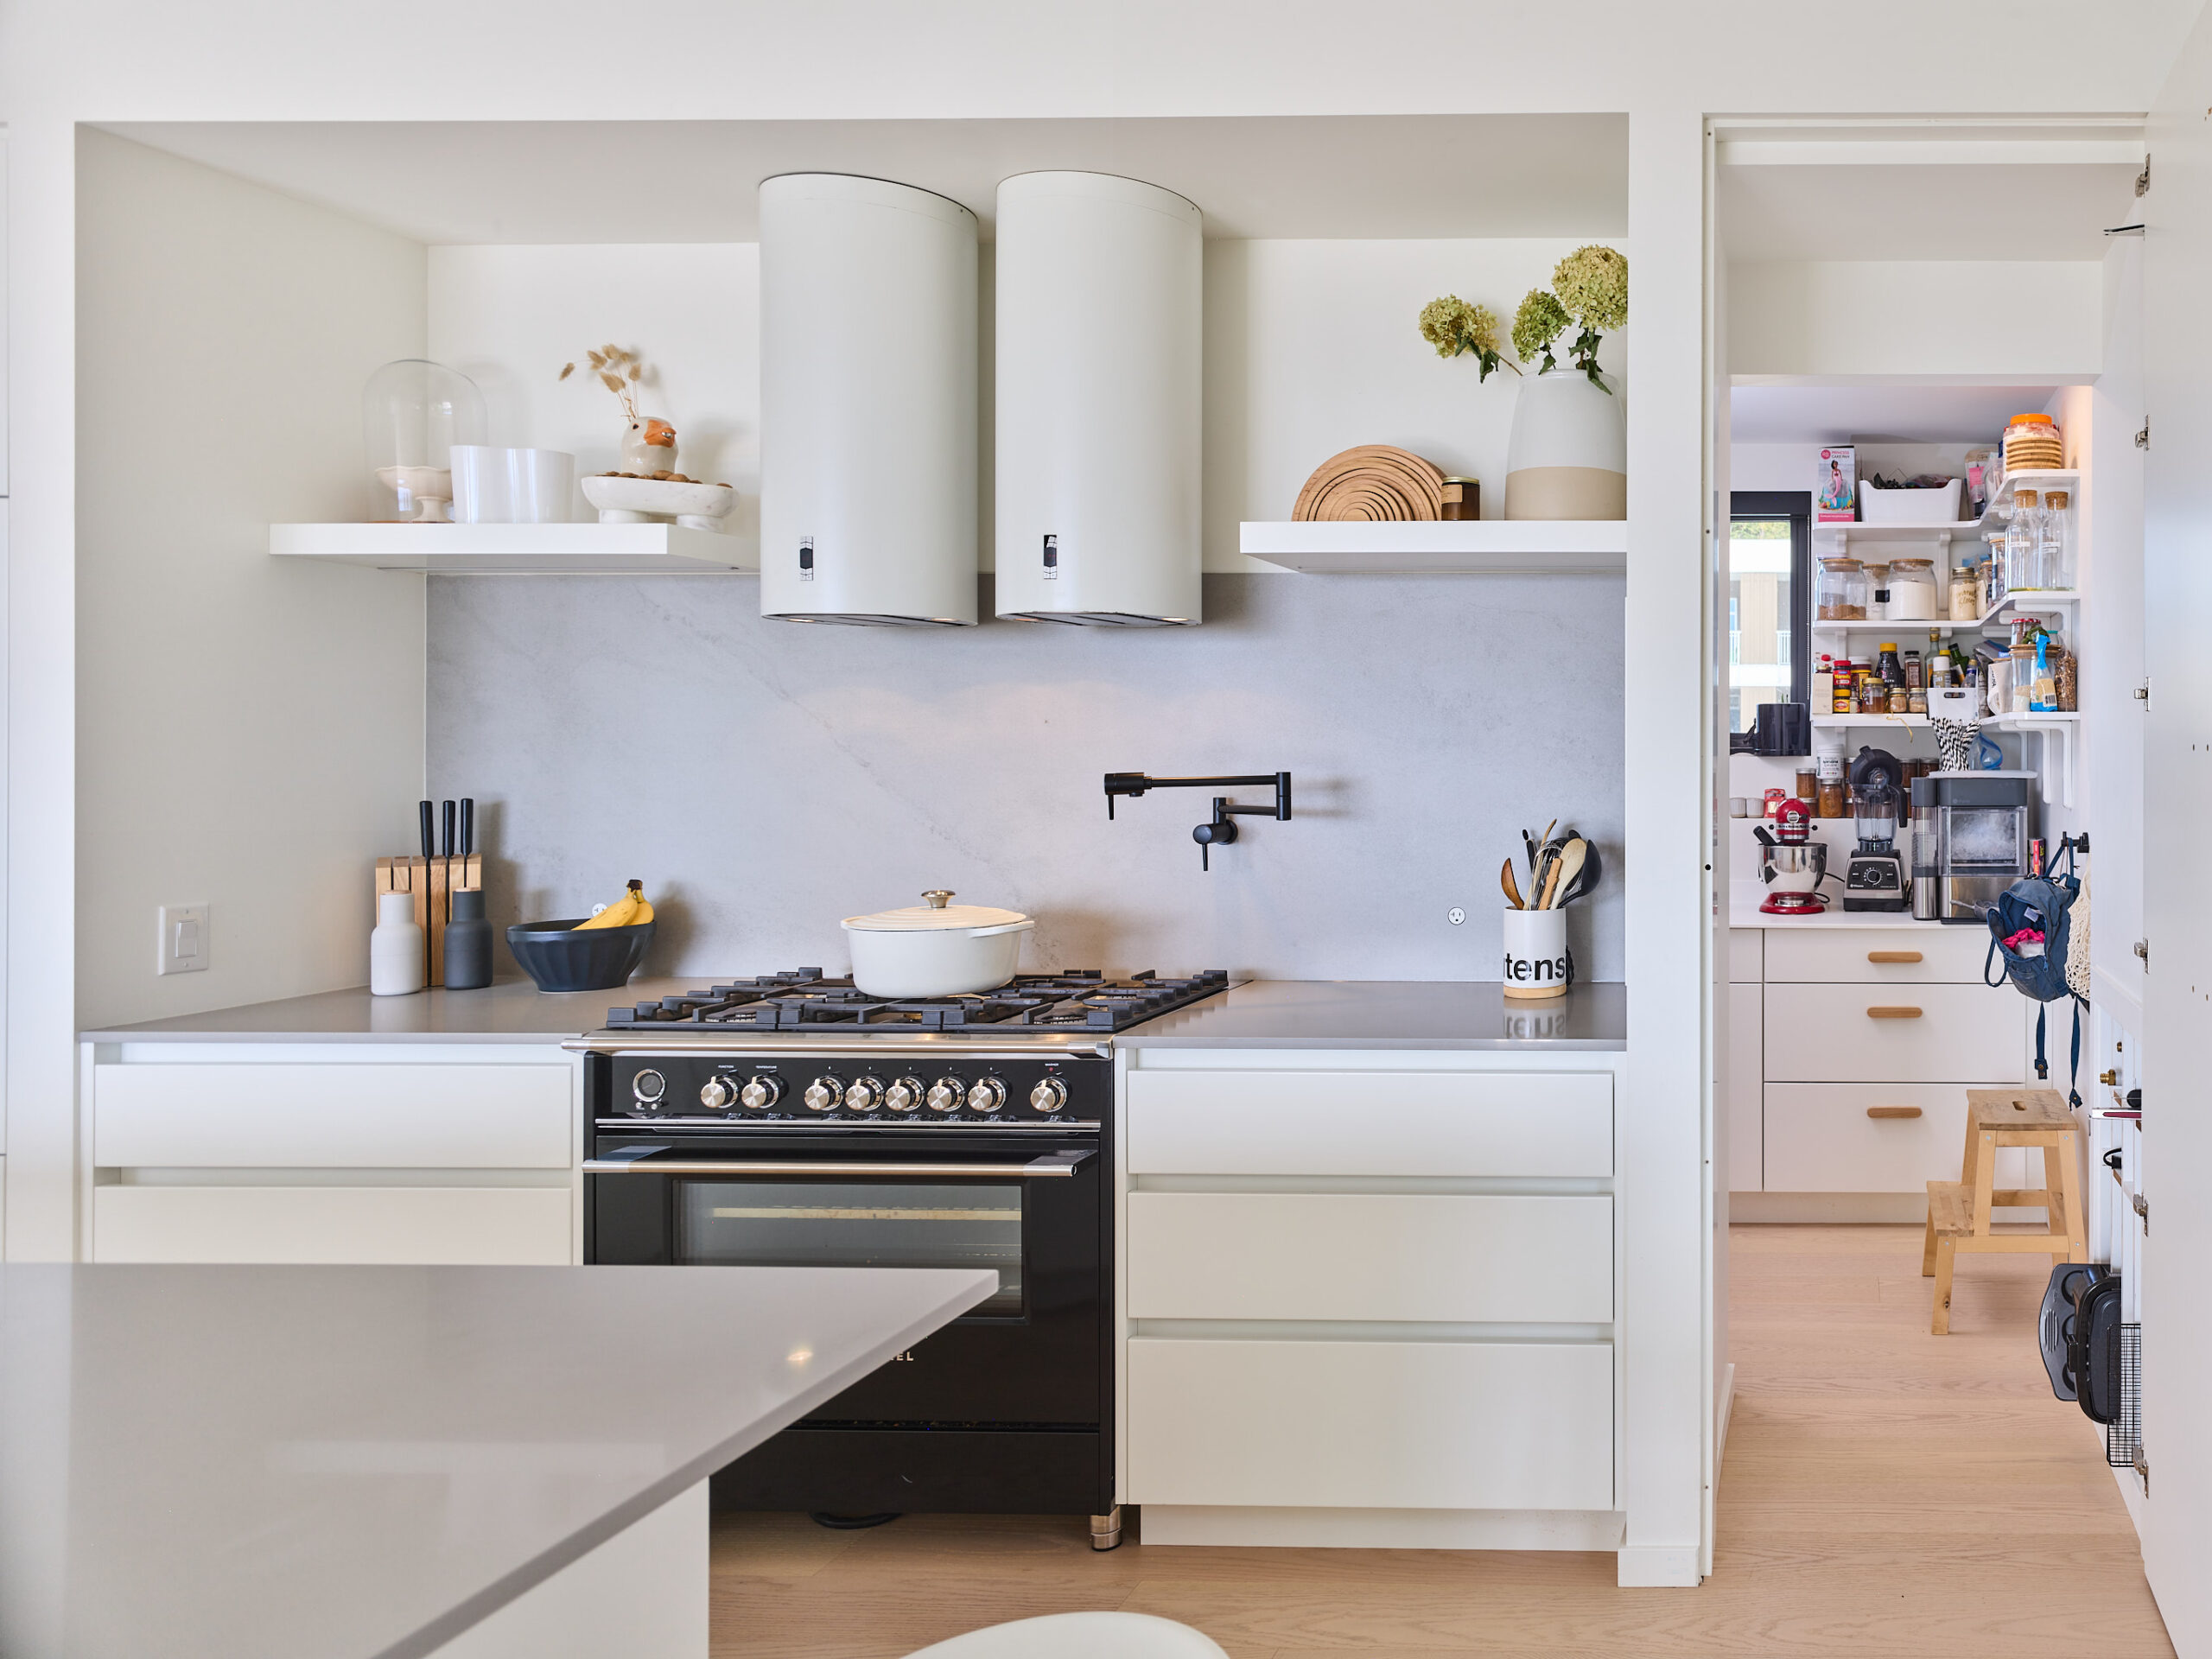 Transform Your Home With Trendy Kitchen Renovations in Vancouver